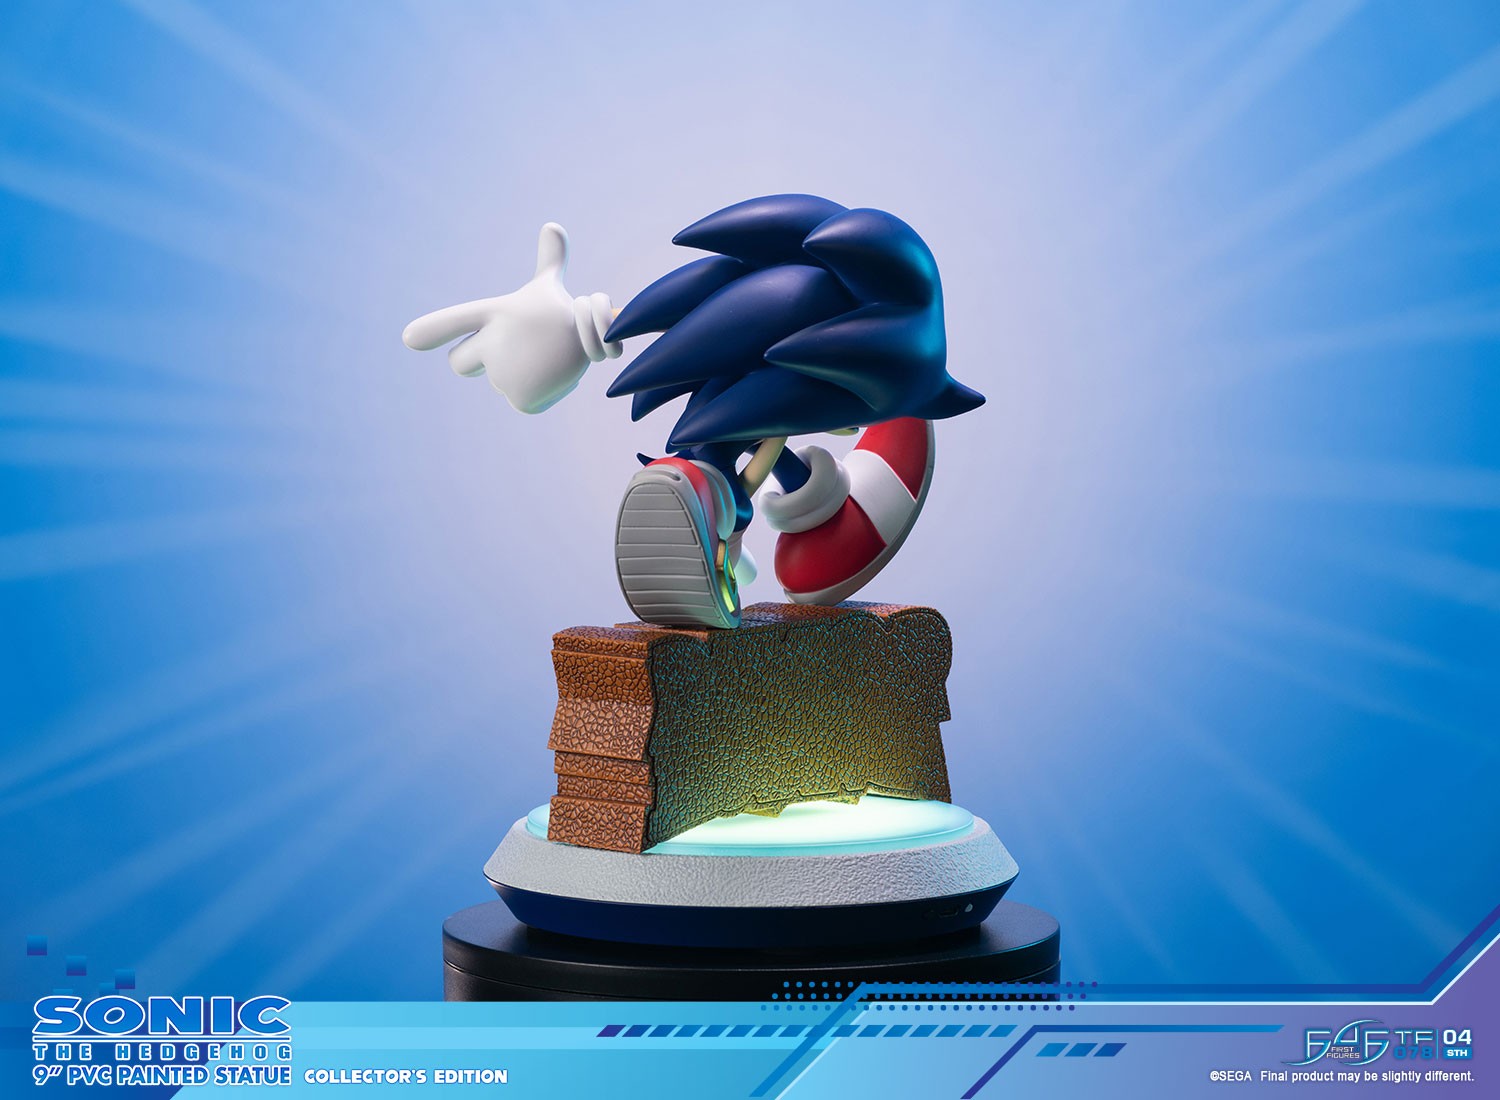 Sonic Adventure - Sonic the Hedgehog PVC (Collector's Edition)